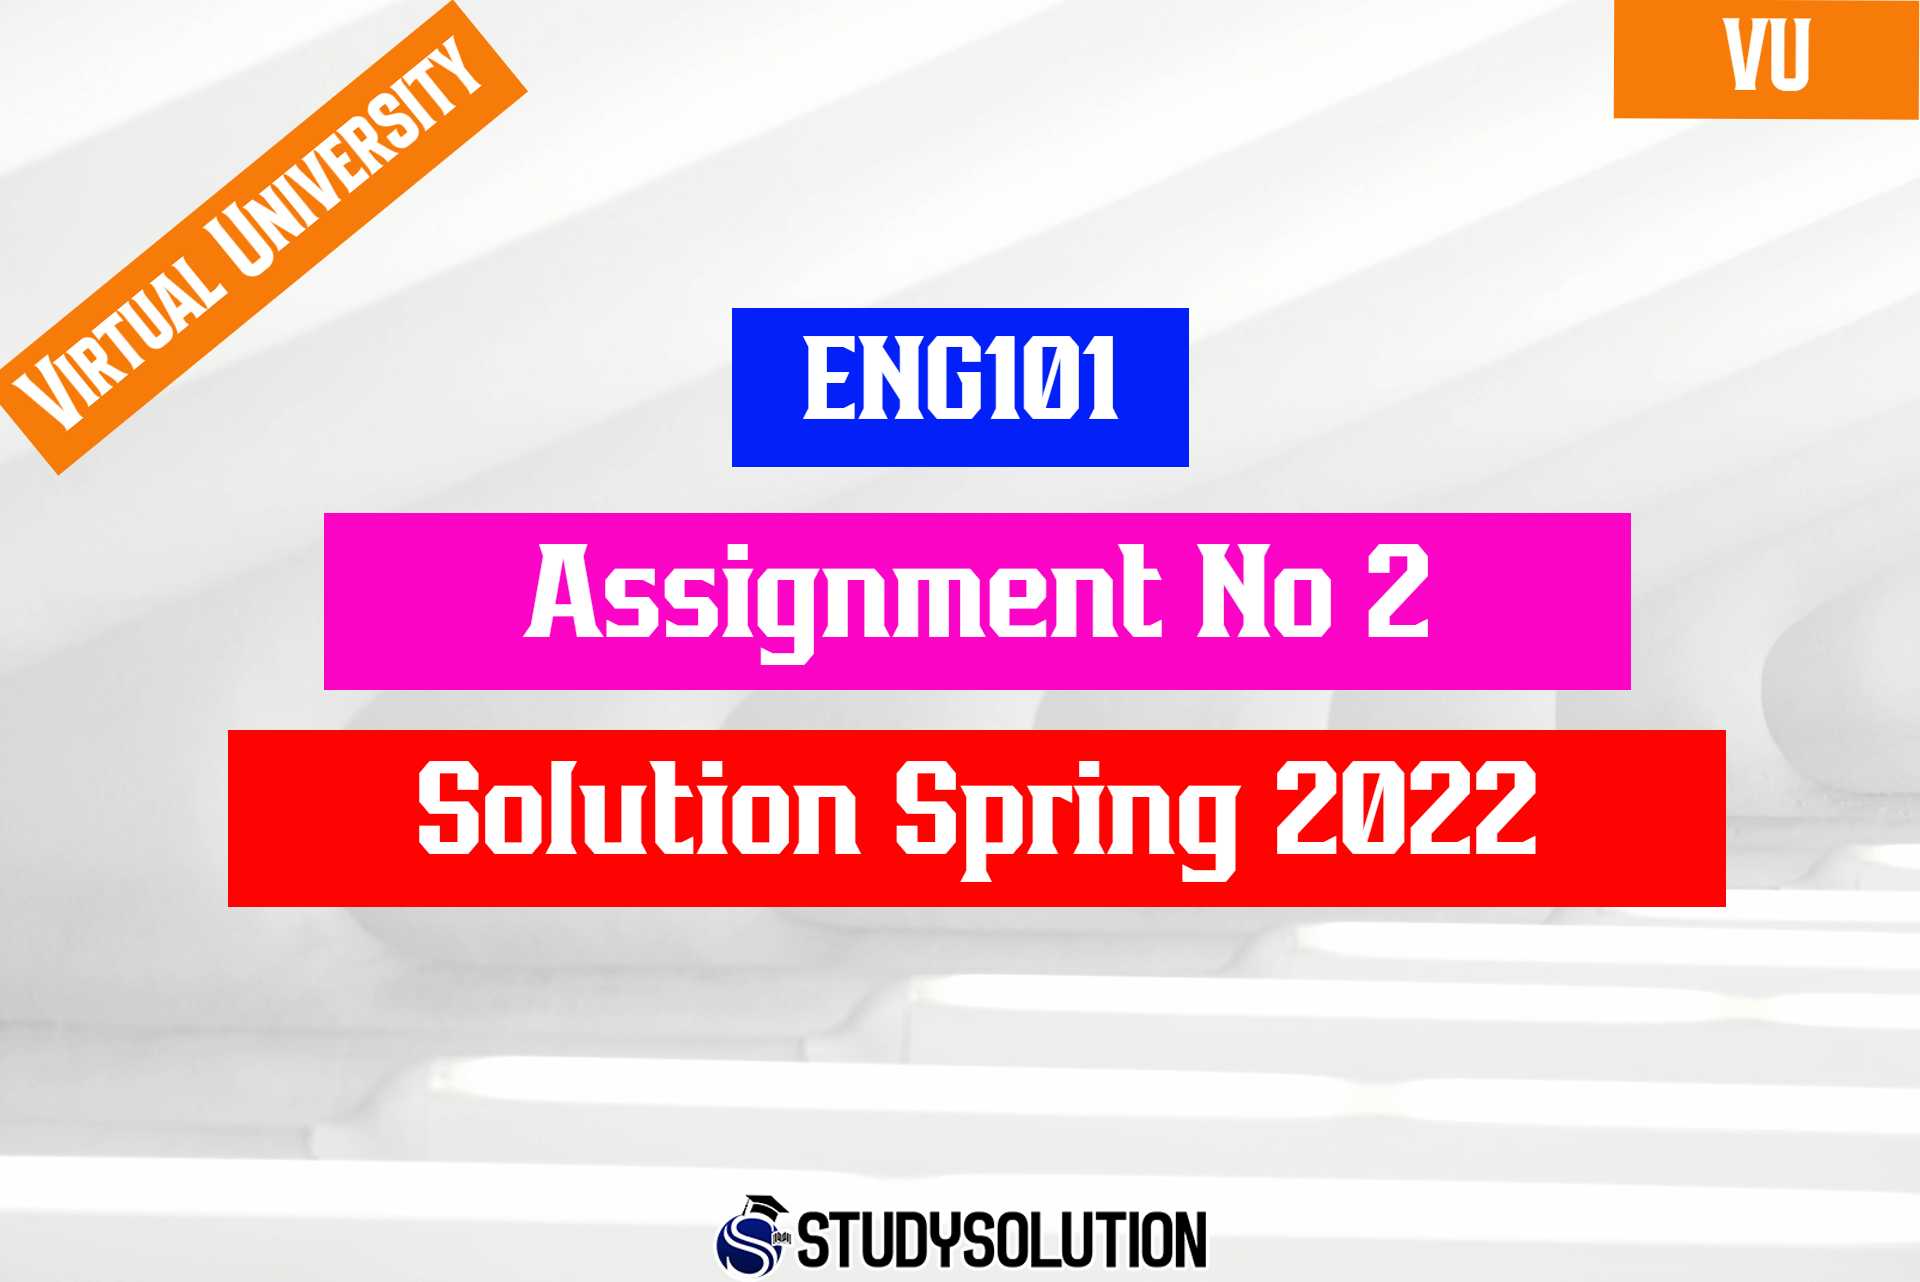 ENG101 Assignment No 2 Solution Spring 2022